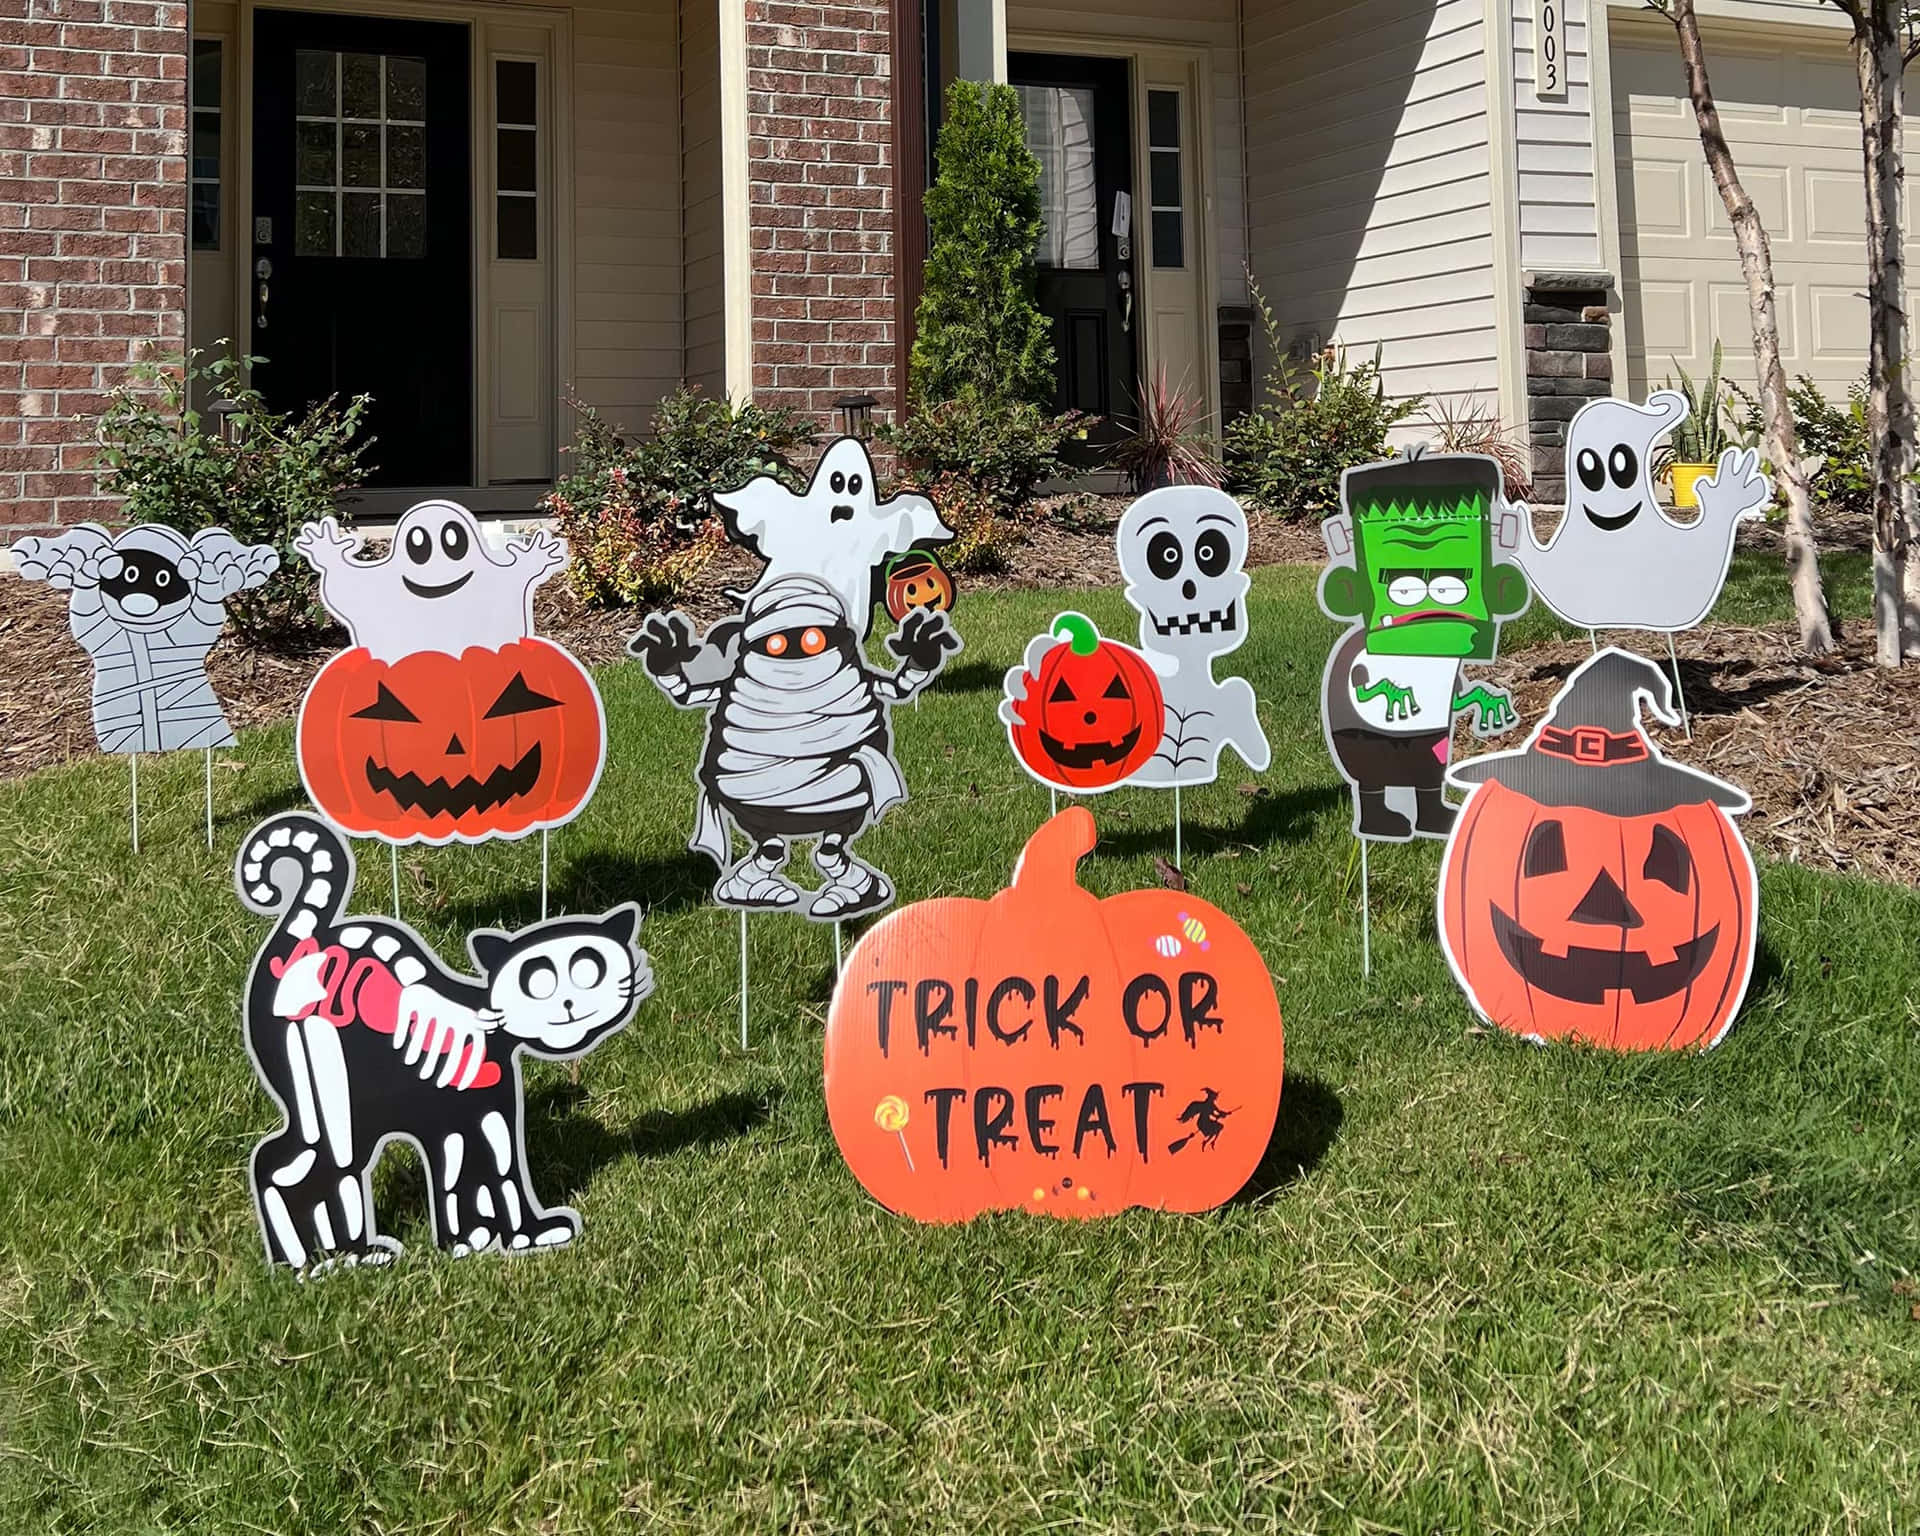 "Get creative with your spooky Halloween yard decorations!" Wallpaper